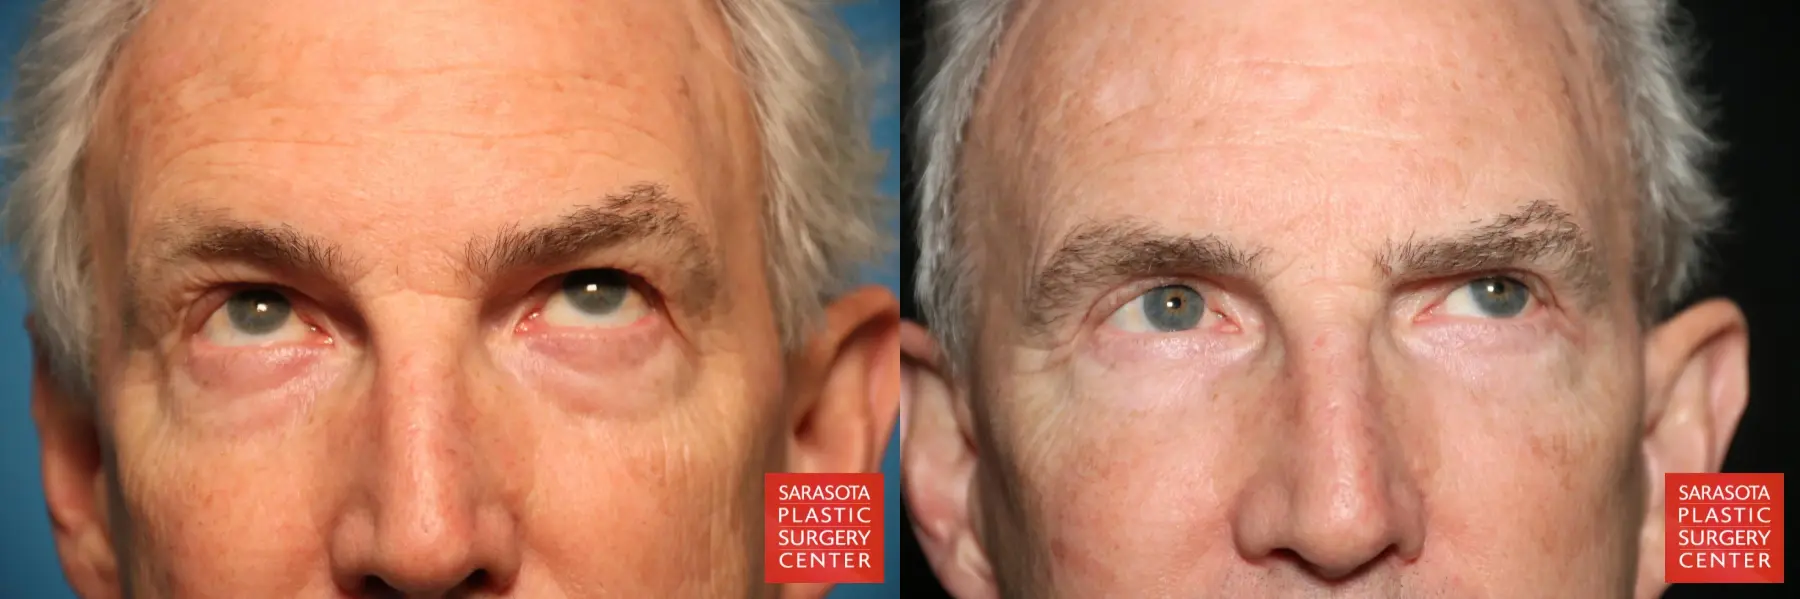 Eyelid Surgery: Patient 7 - Before and After 2